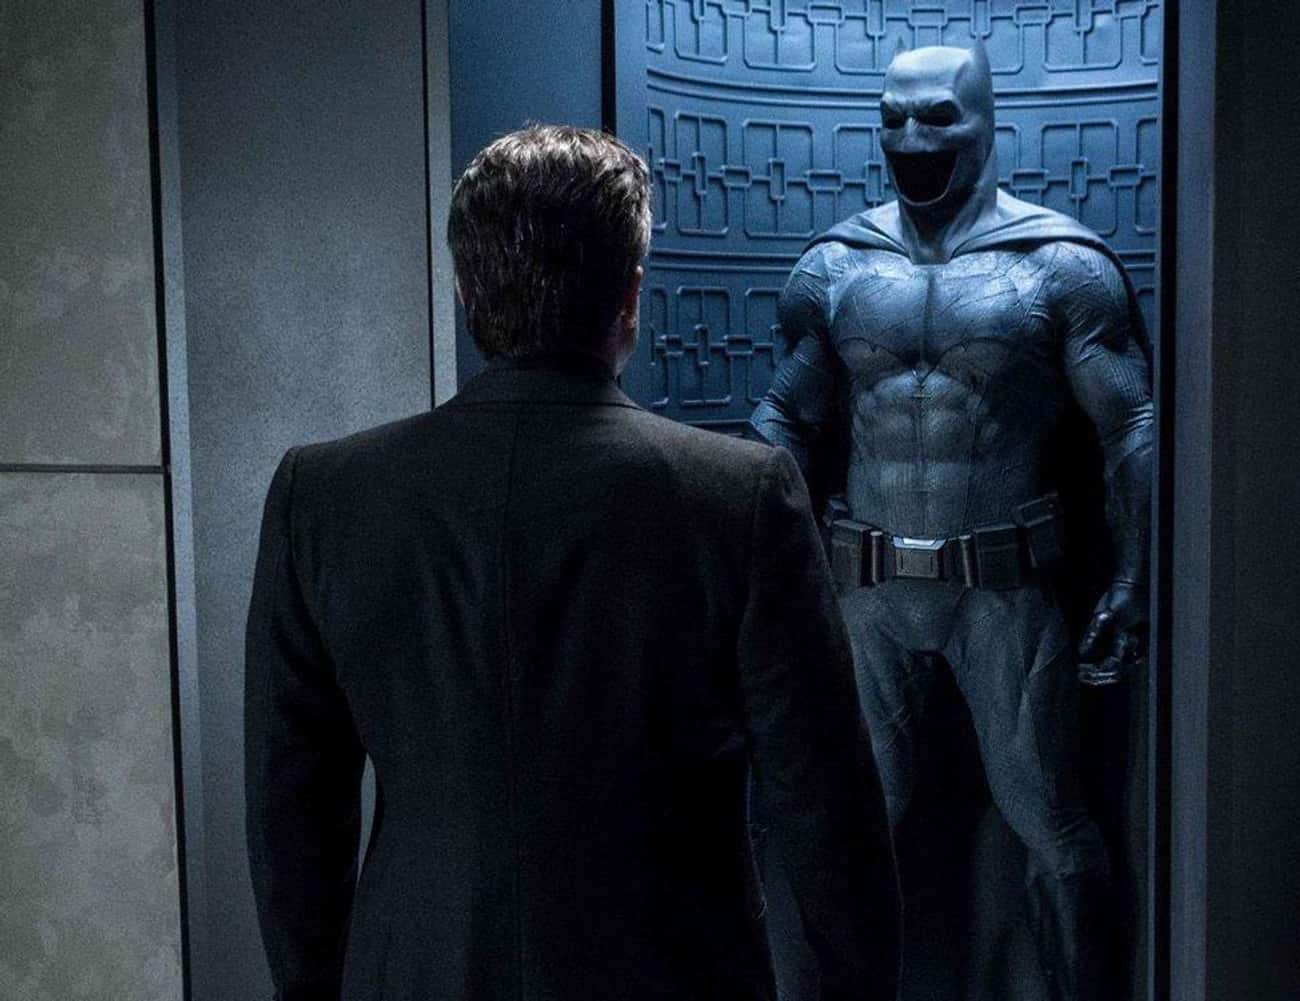 The Batsuit Was Simplified And Beaten Up To Emphasize Batman’s Brawniness